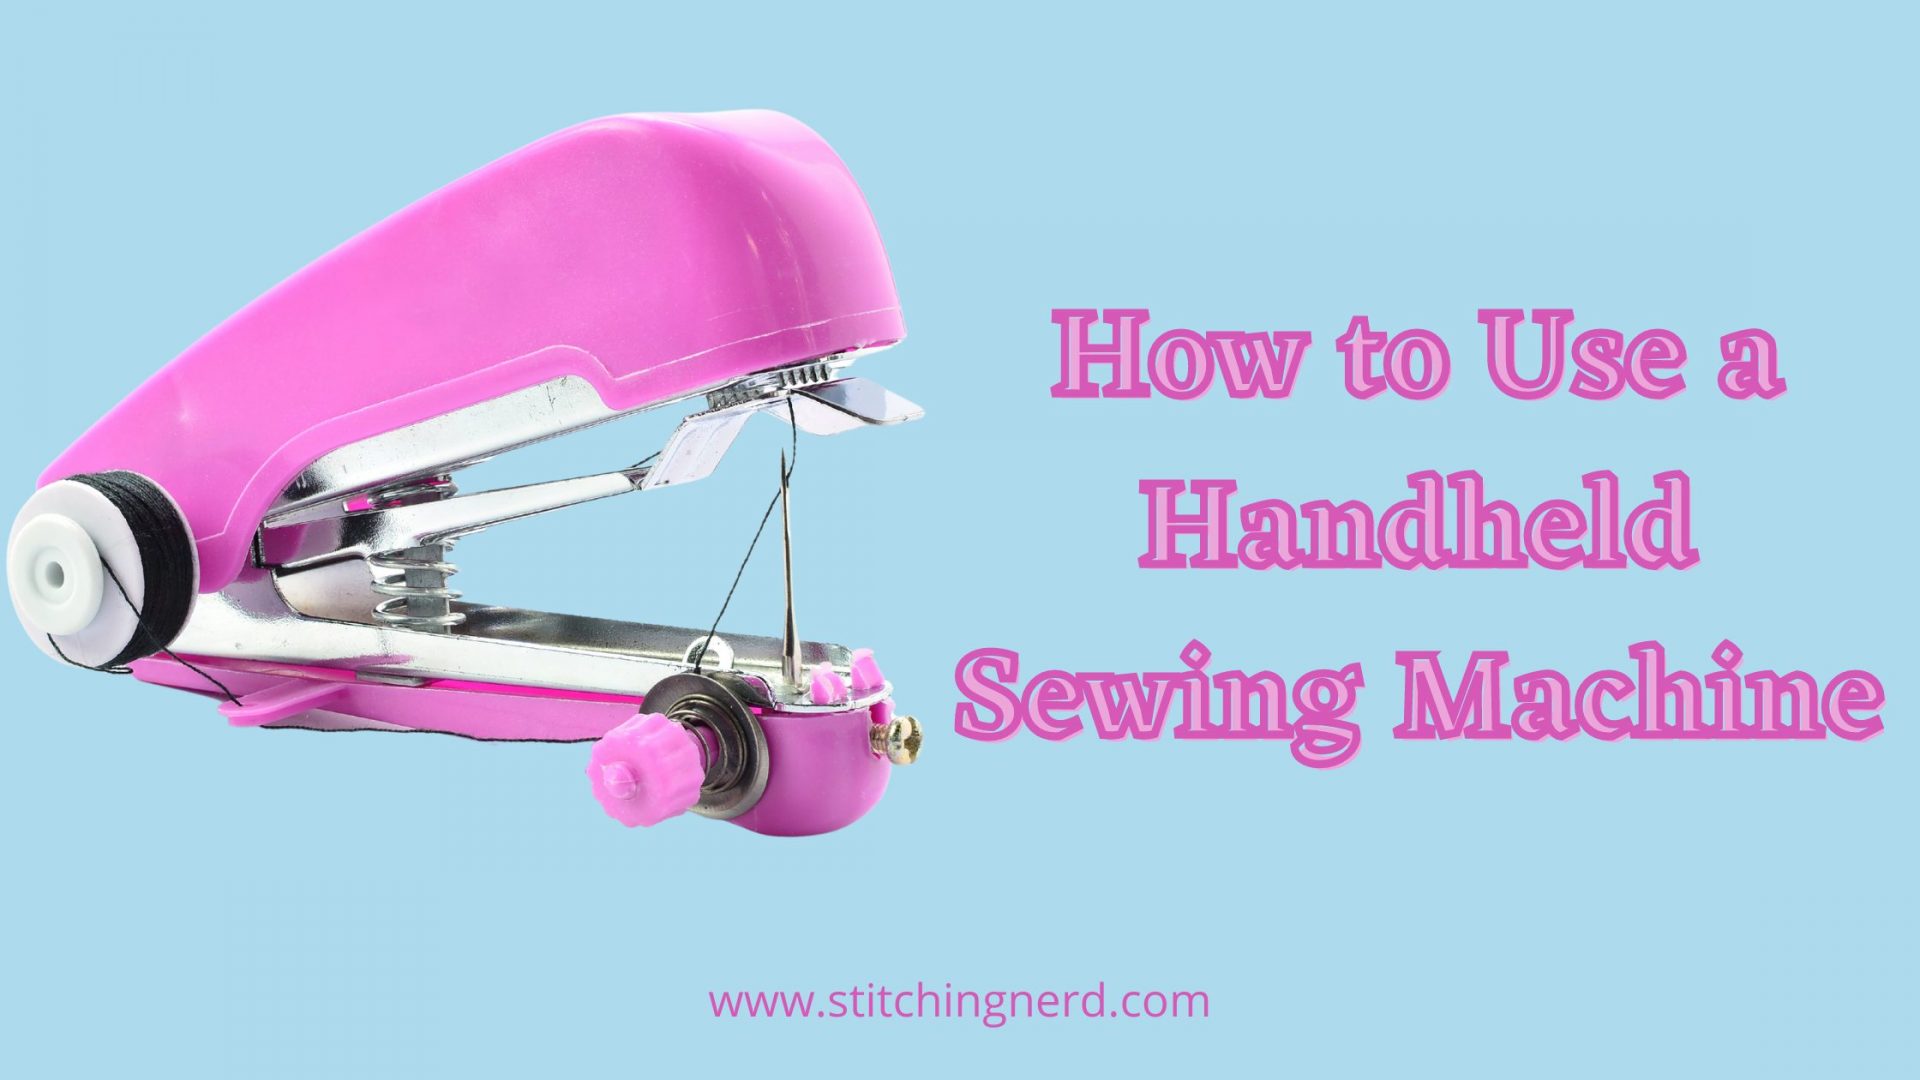 How to Use a Handheld Sewing Machine